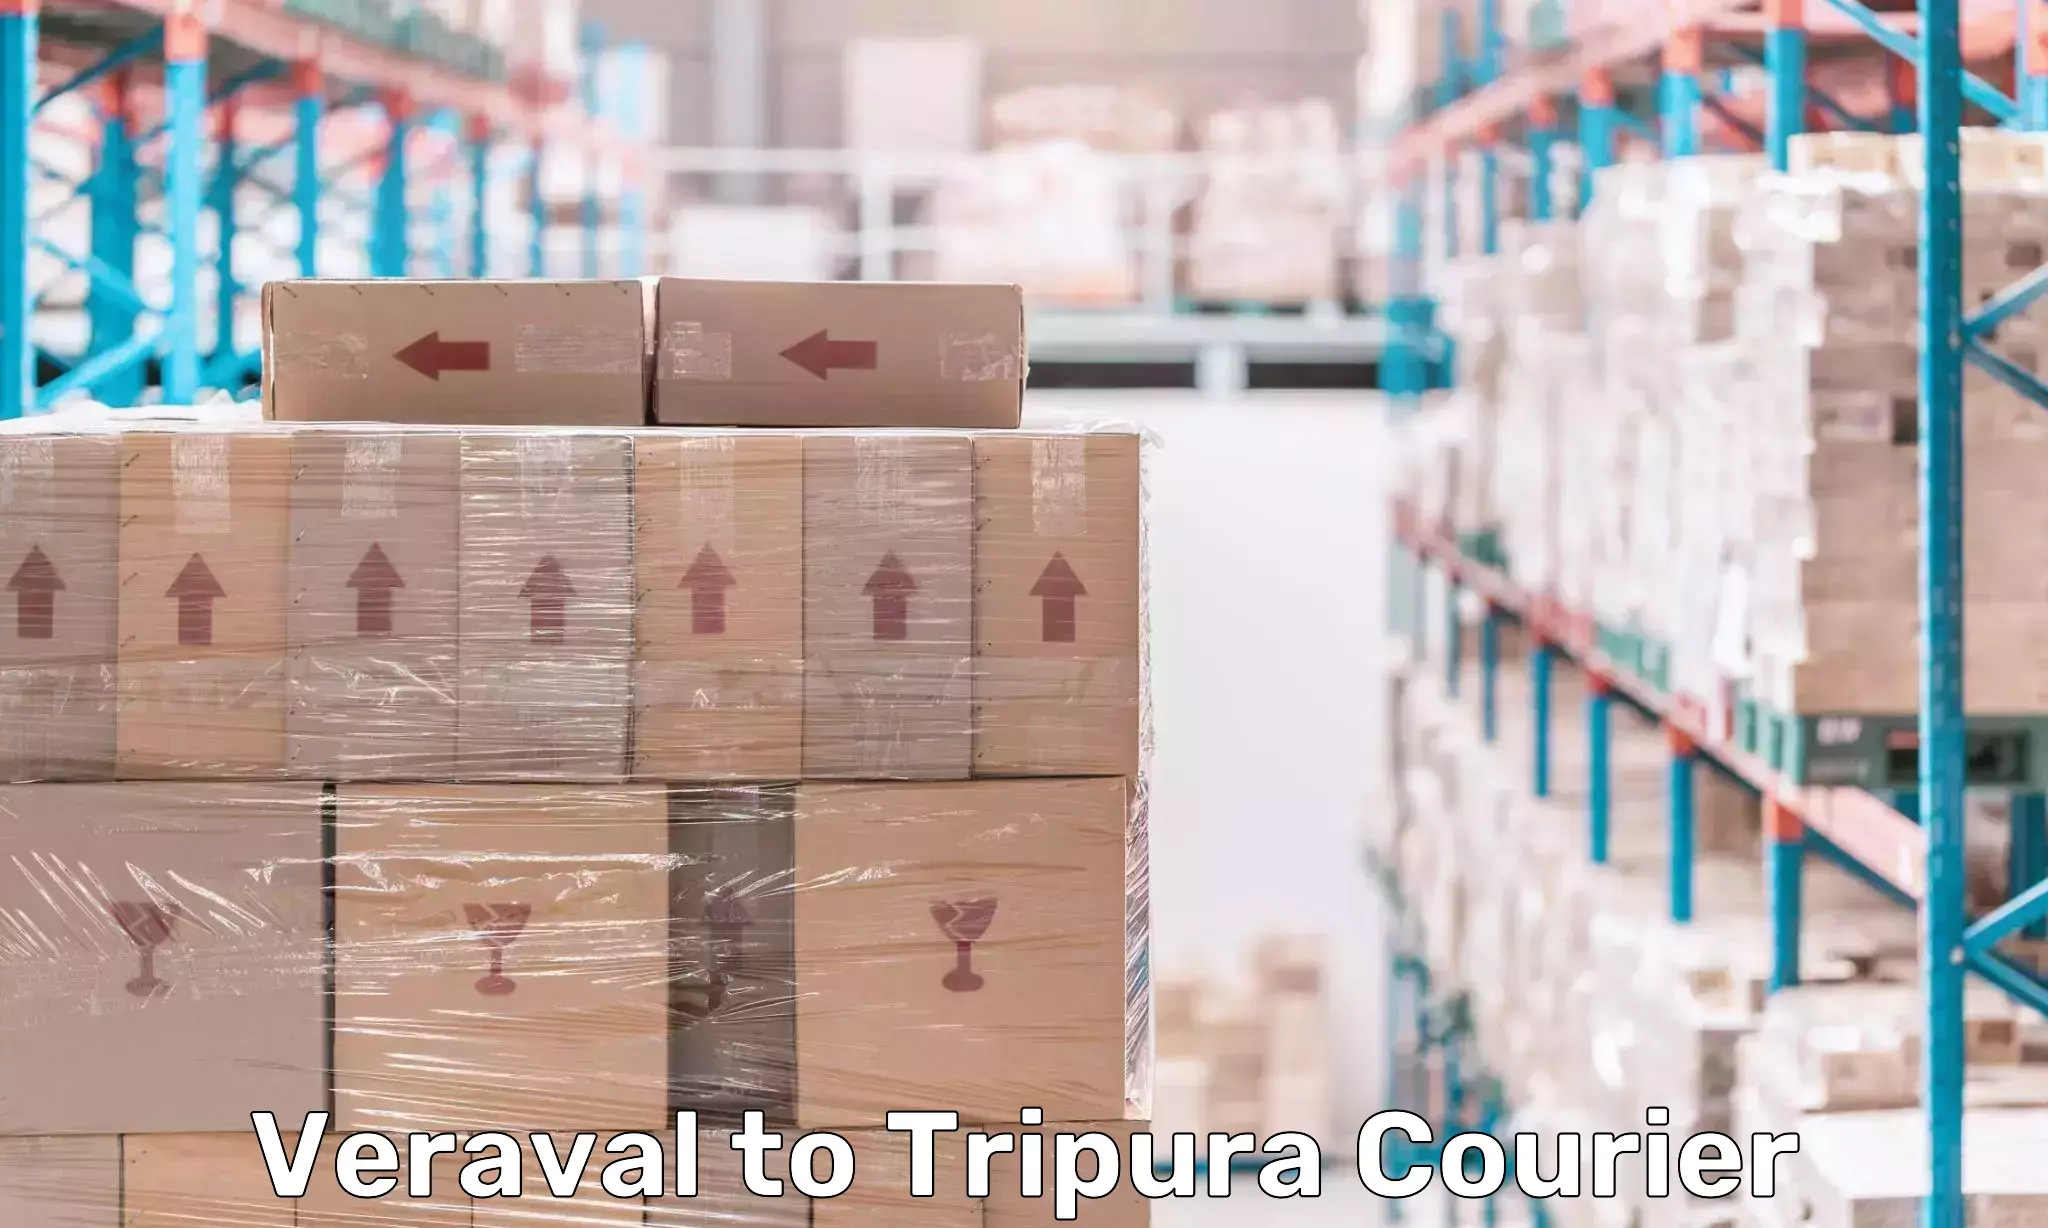 Efficient courier operations Veraval to Udaipur Tripura